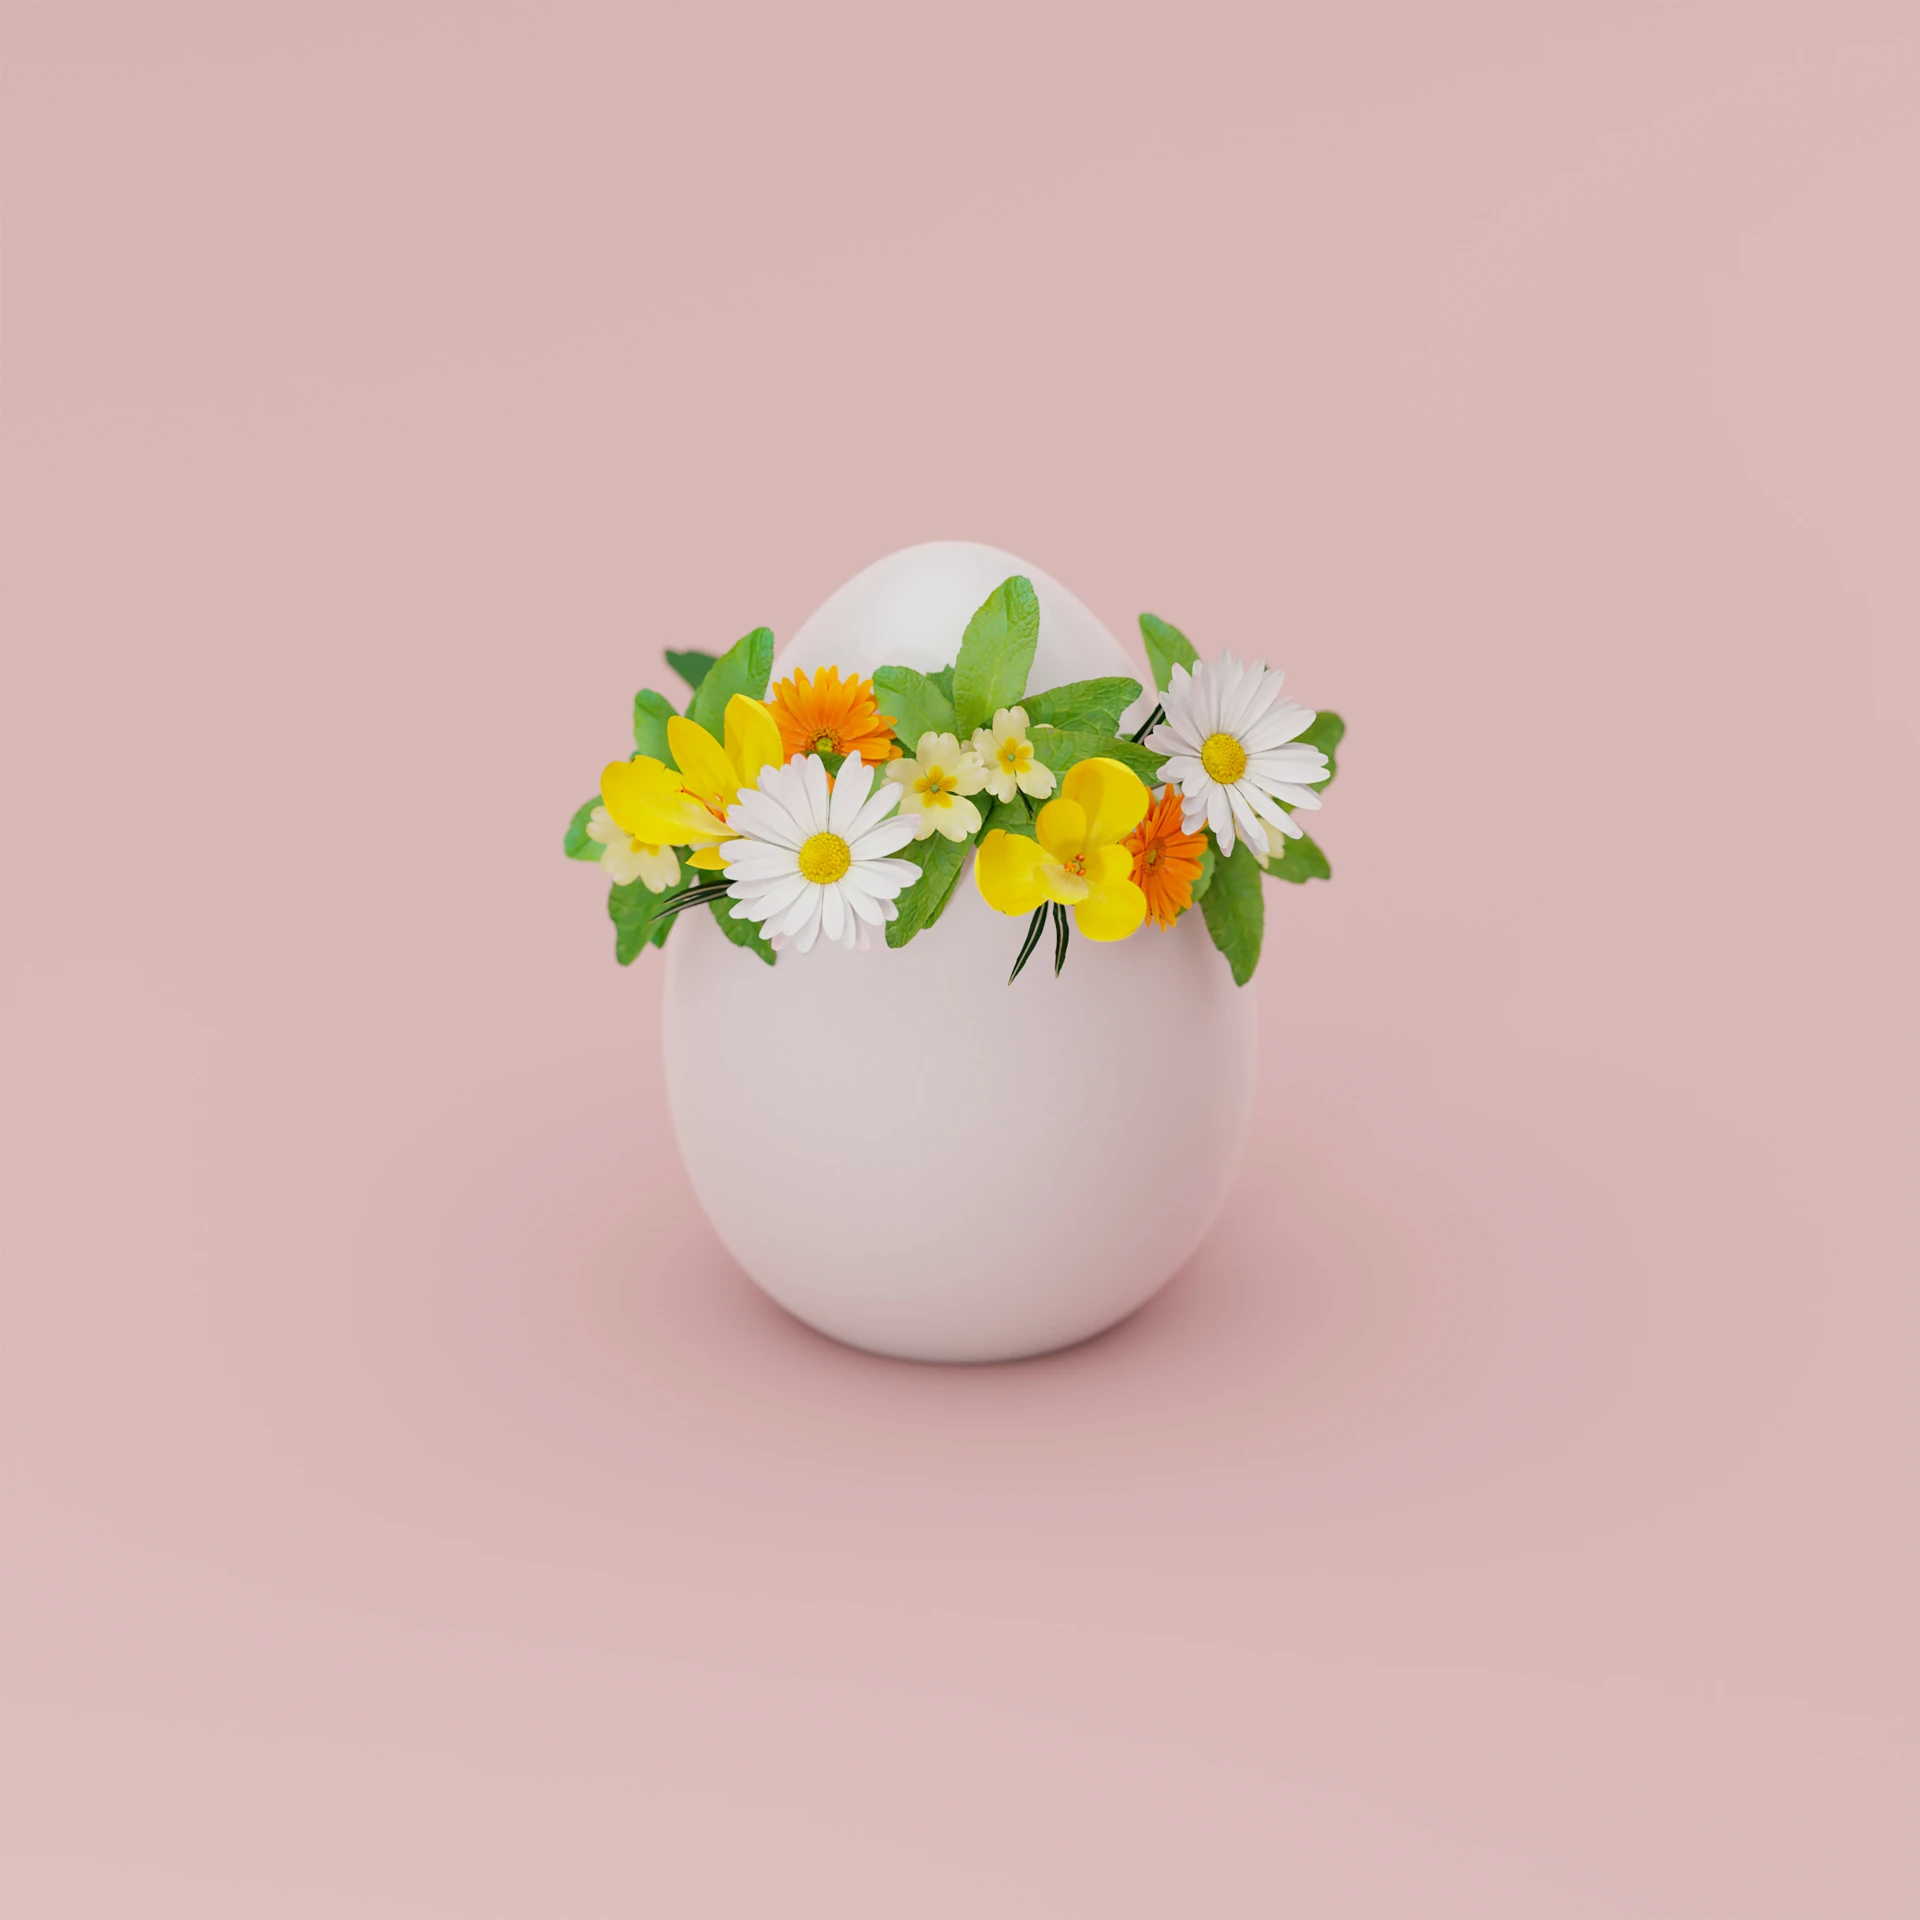 flowers in an egg shell on a pink background